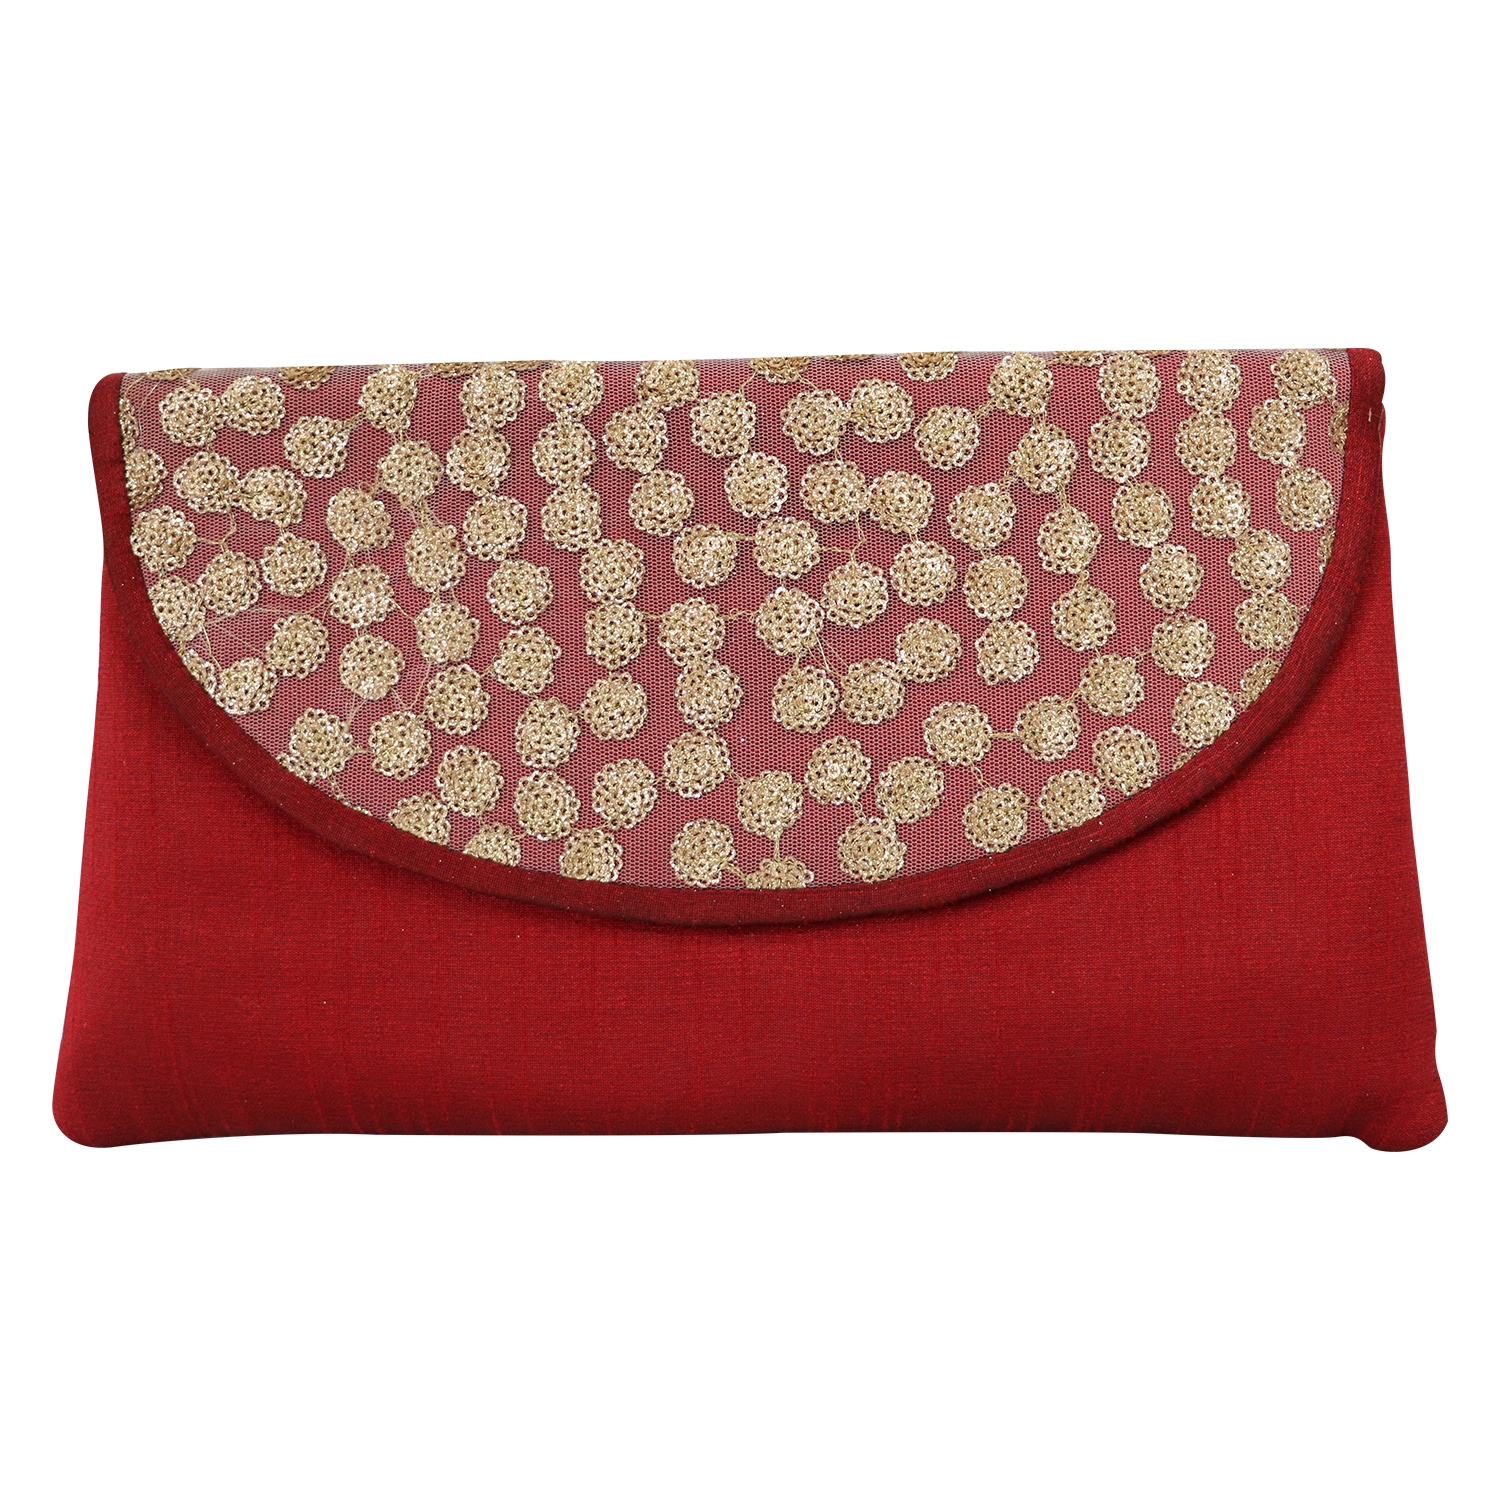 EMM | Lely's Handcrafted Designer Clutch For Party/Function